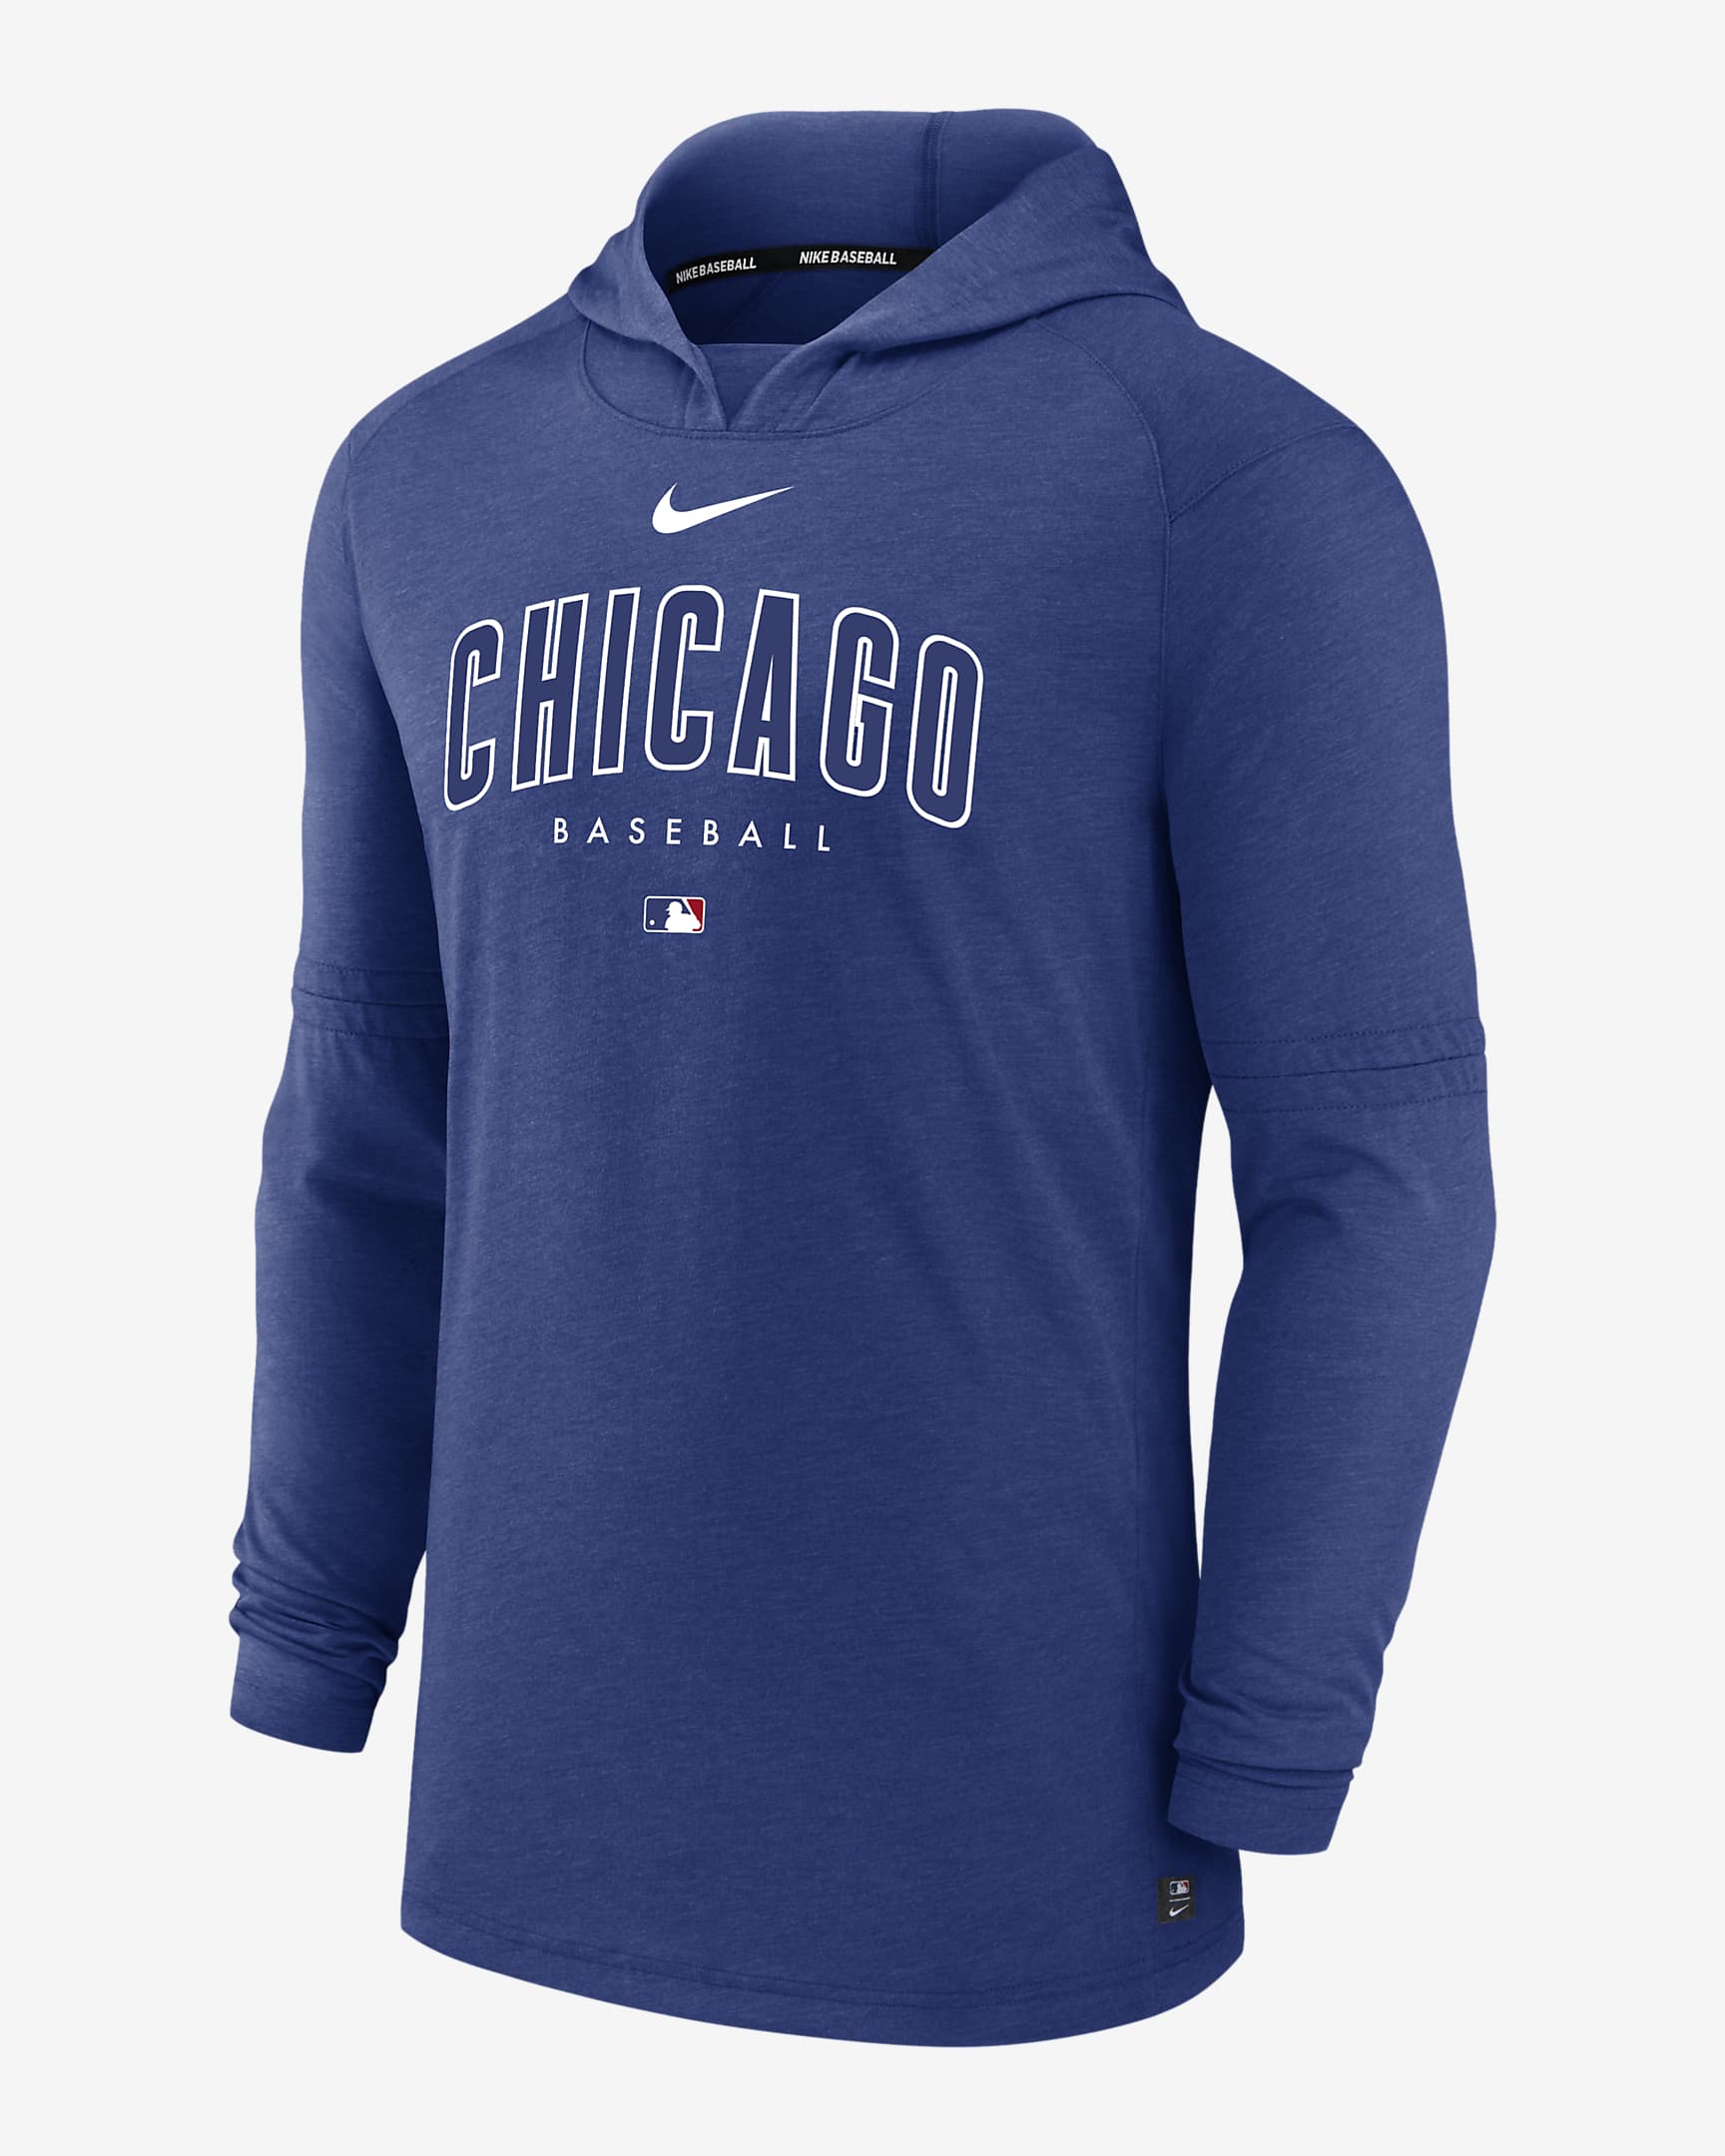 Nike Dri-FIT Early Work (MLB Chicago Cubs) Men's Pullover Hoodie. Nike.com